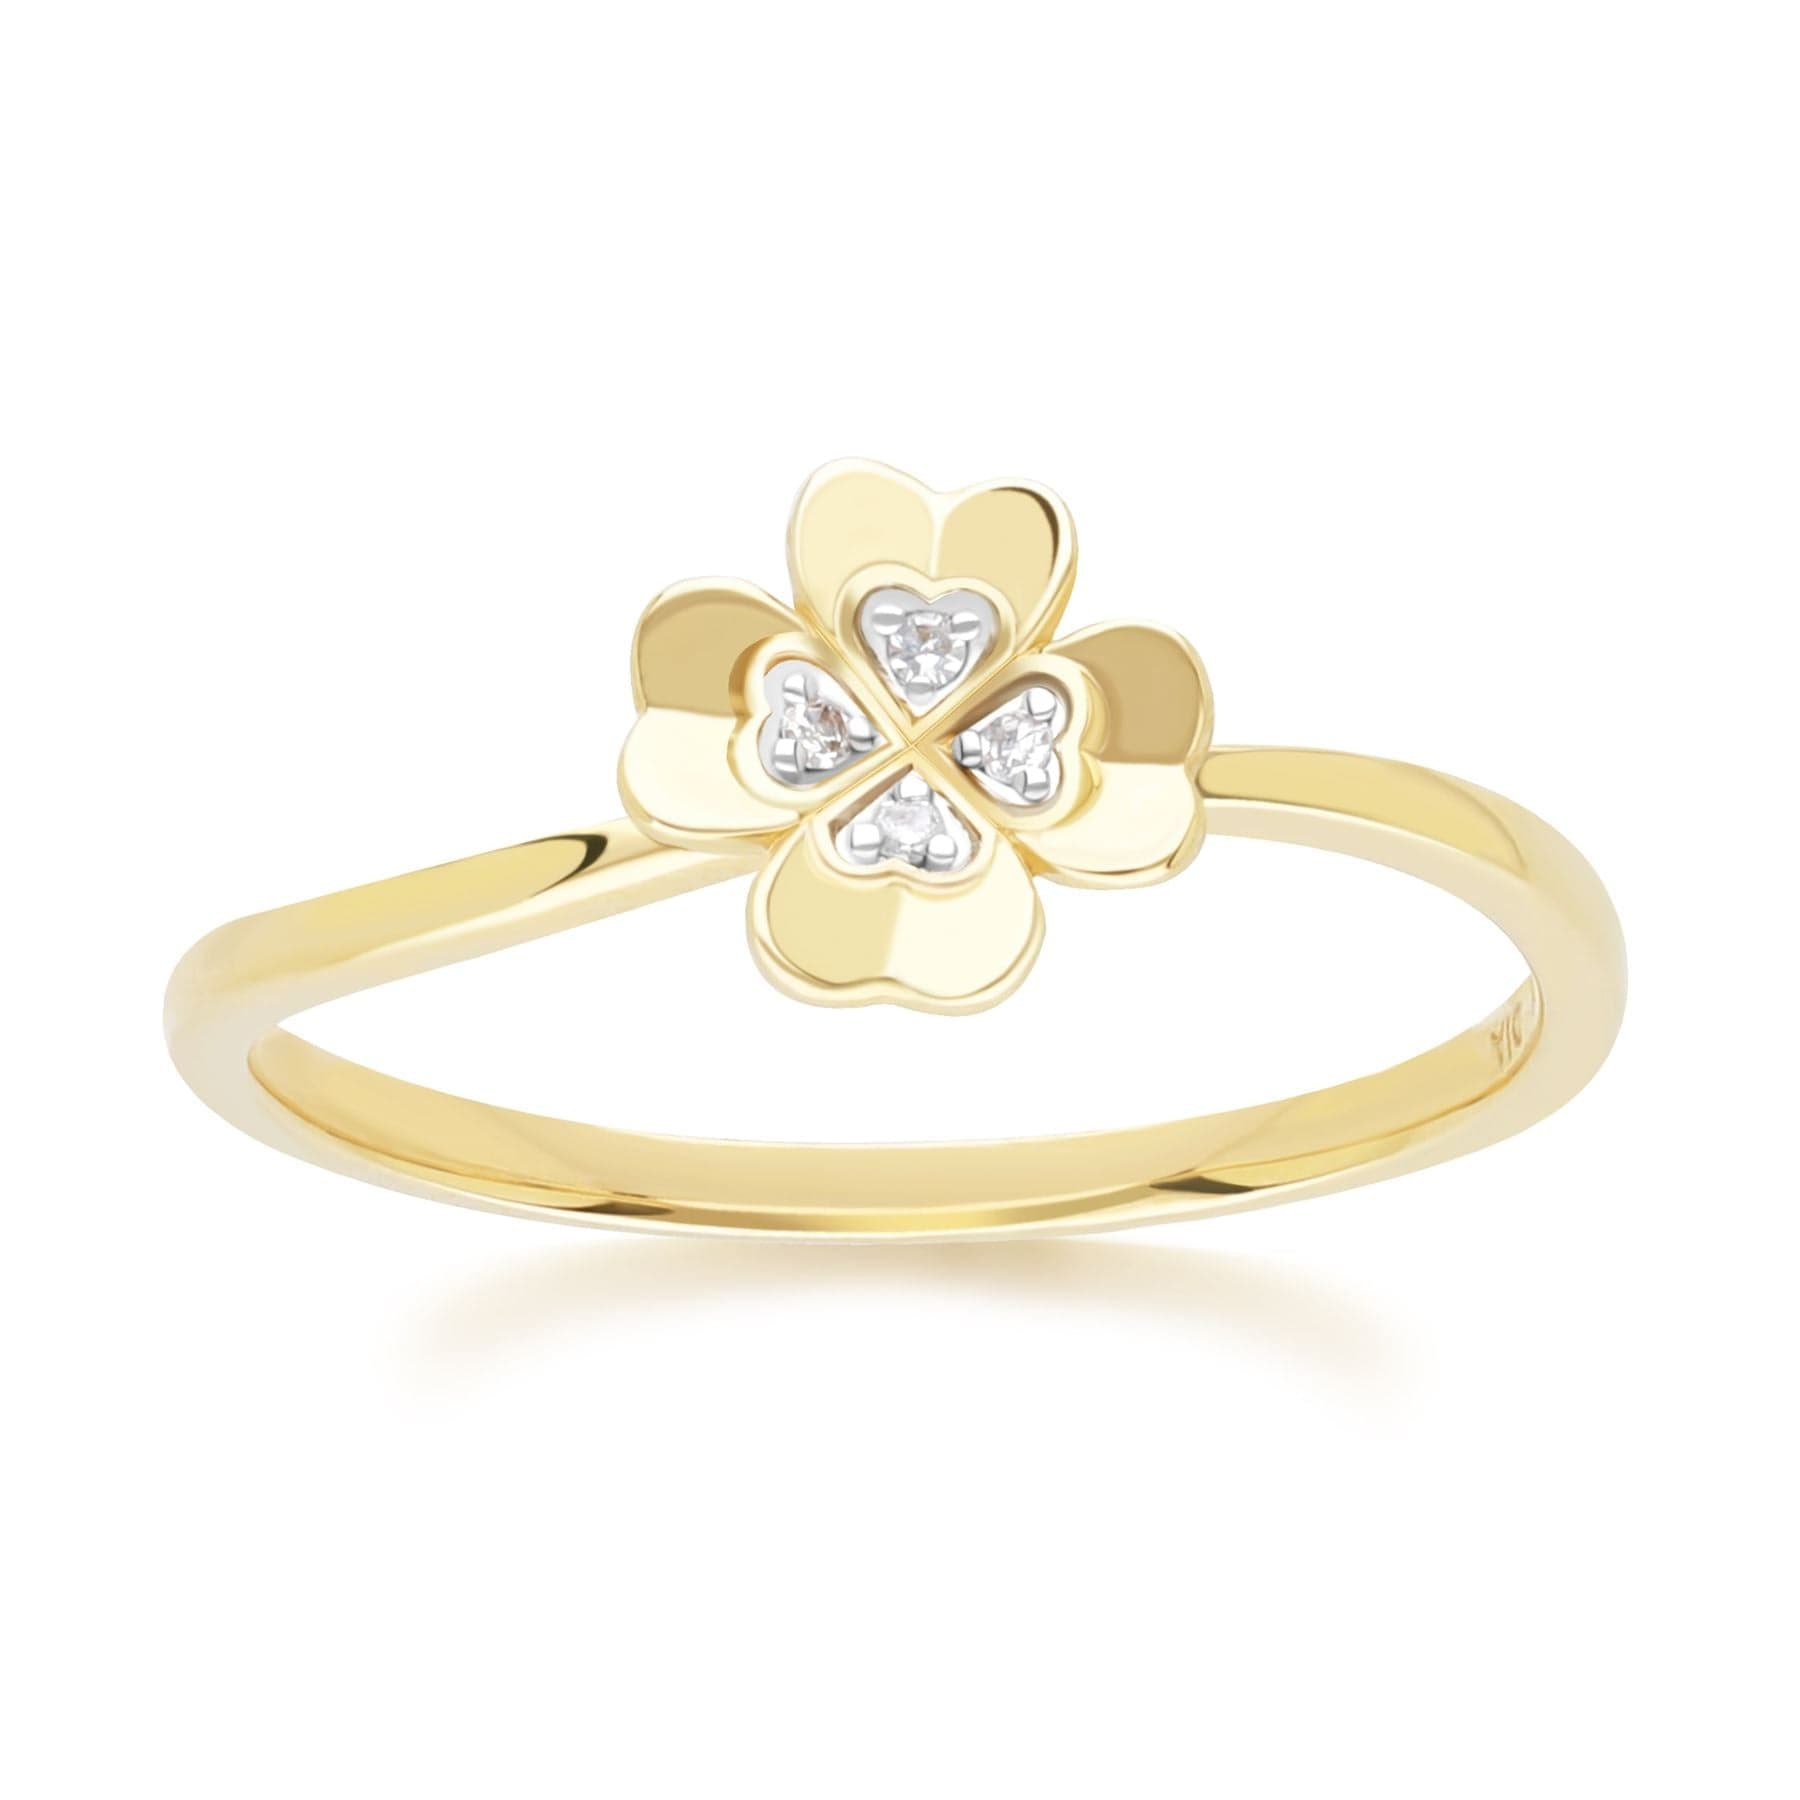 149R3464019 Gardenia Diamond Clover Ring in 9ct Yellow Gold Front